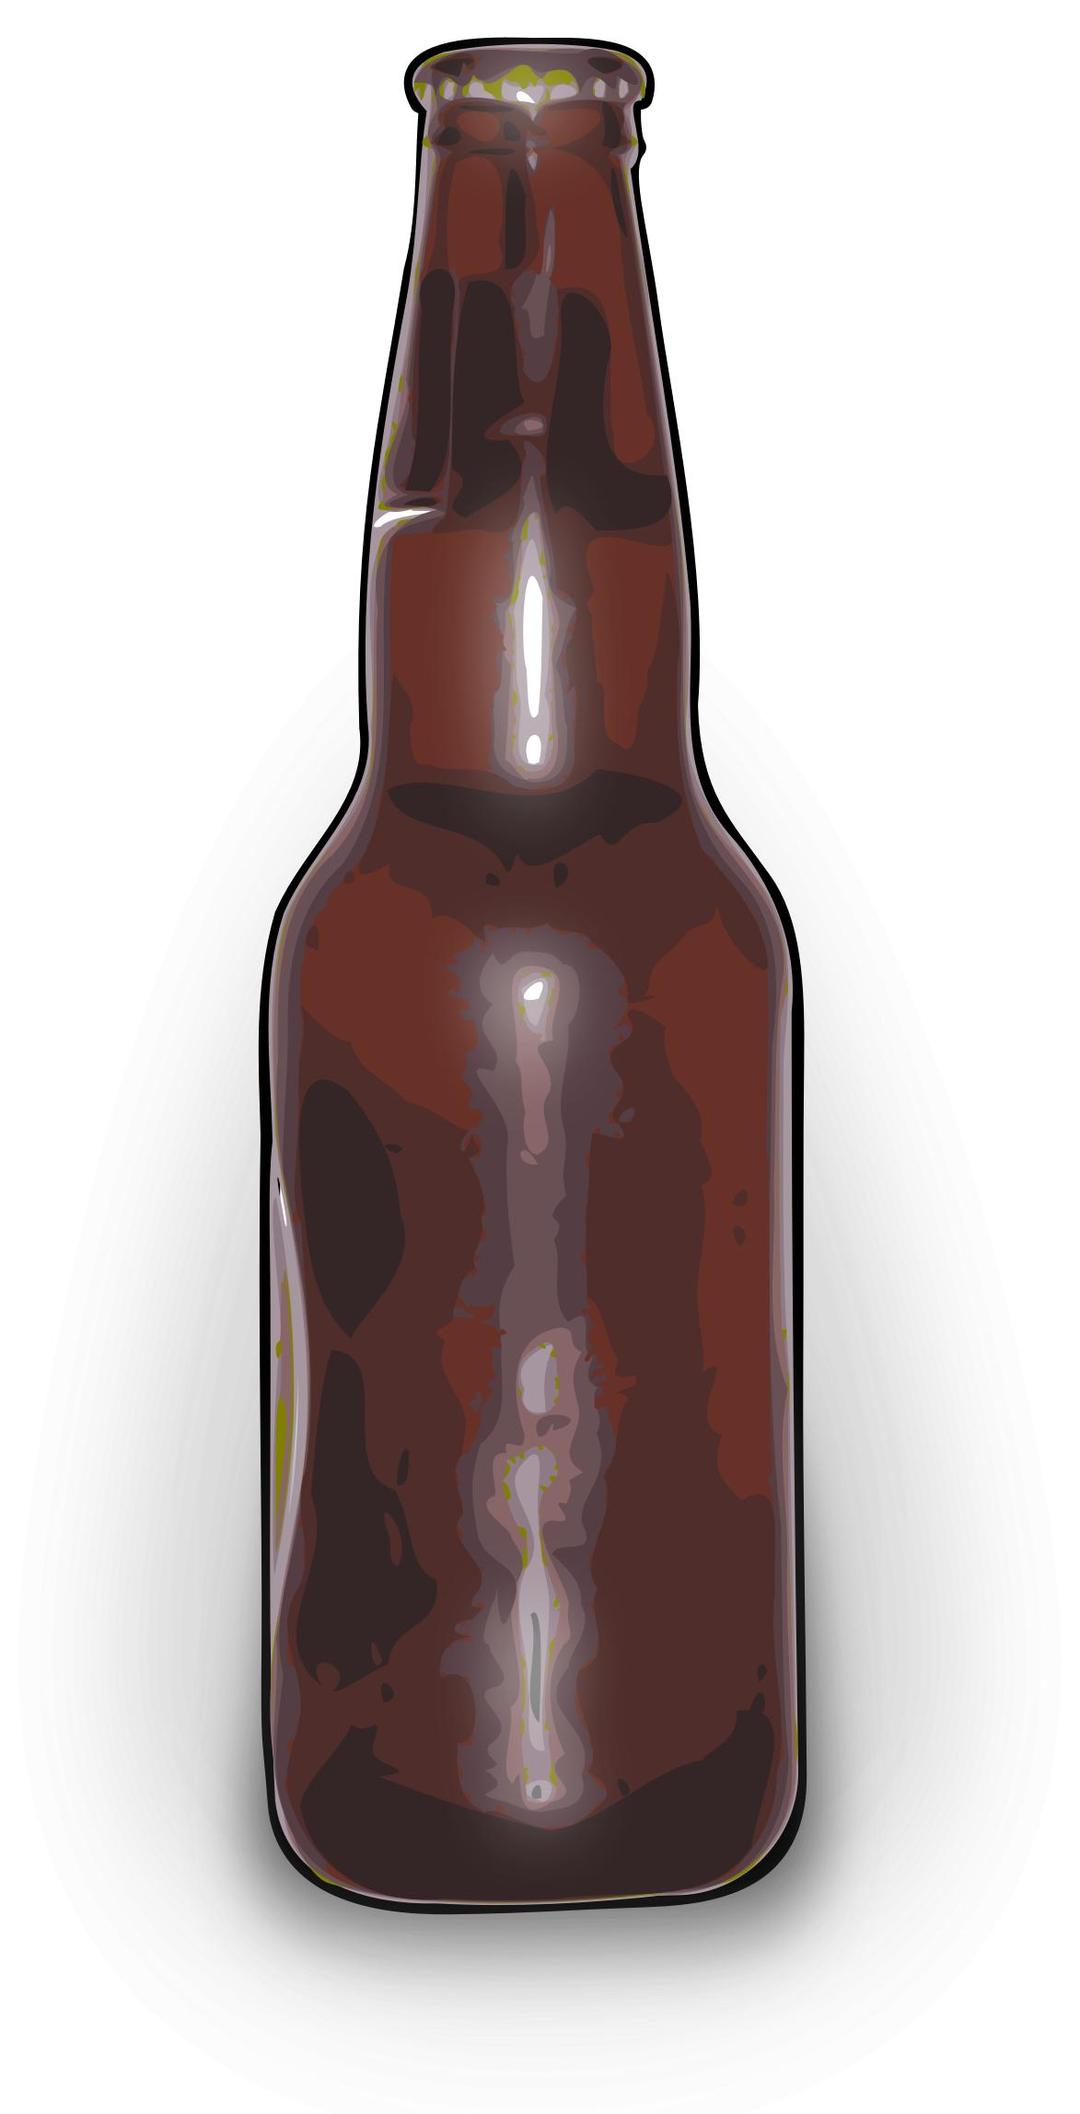 A nice cold one png transparent